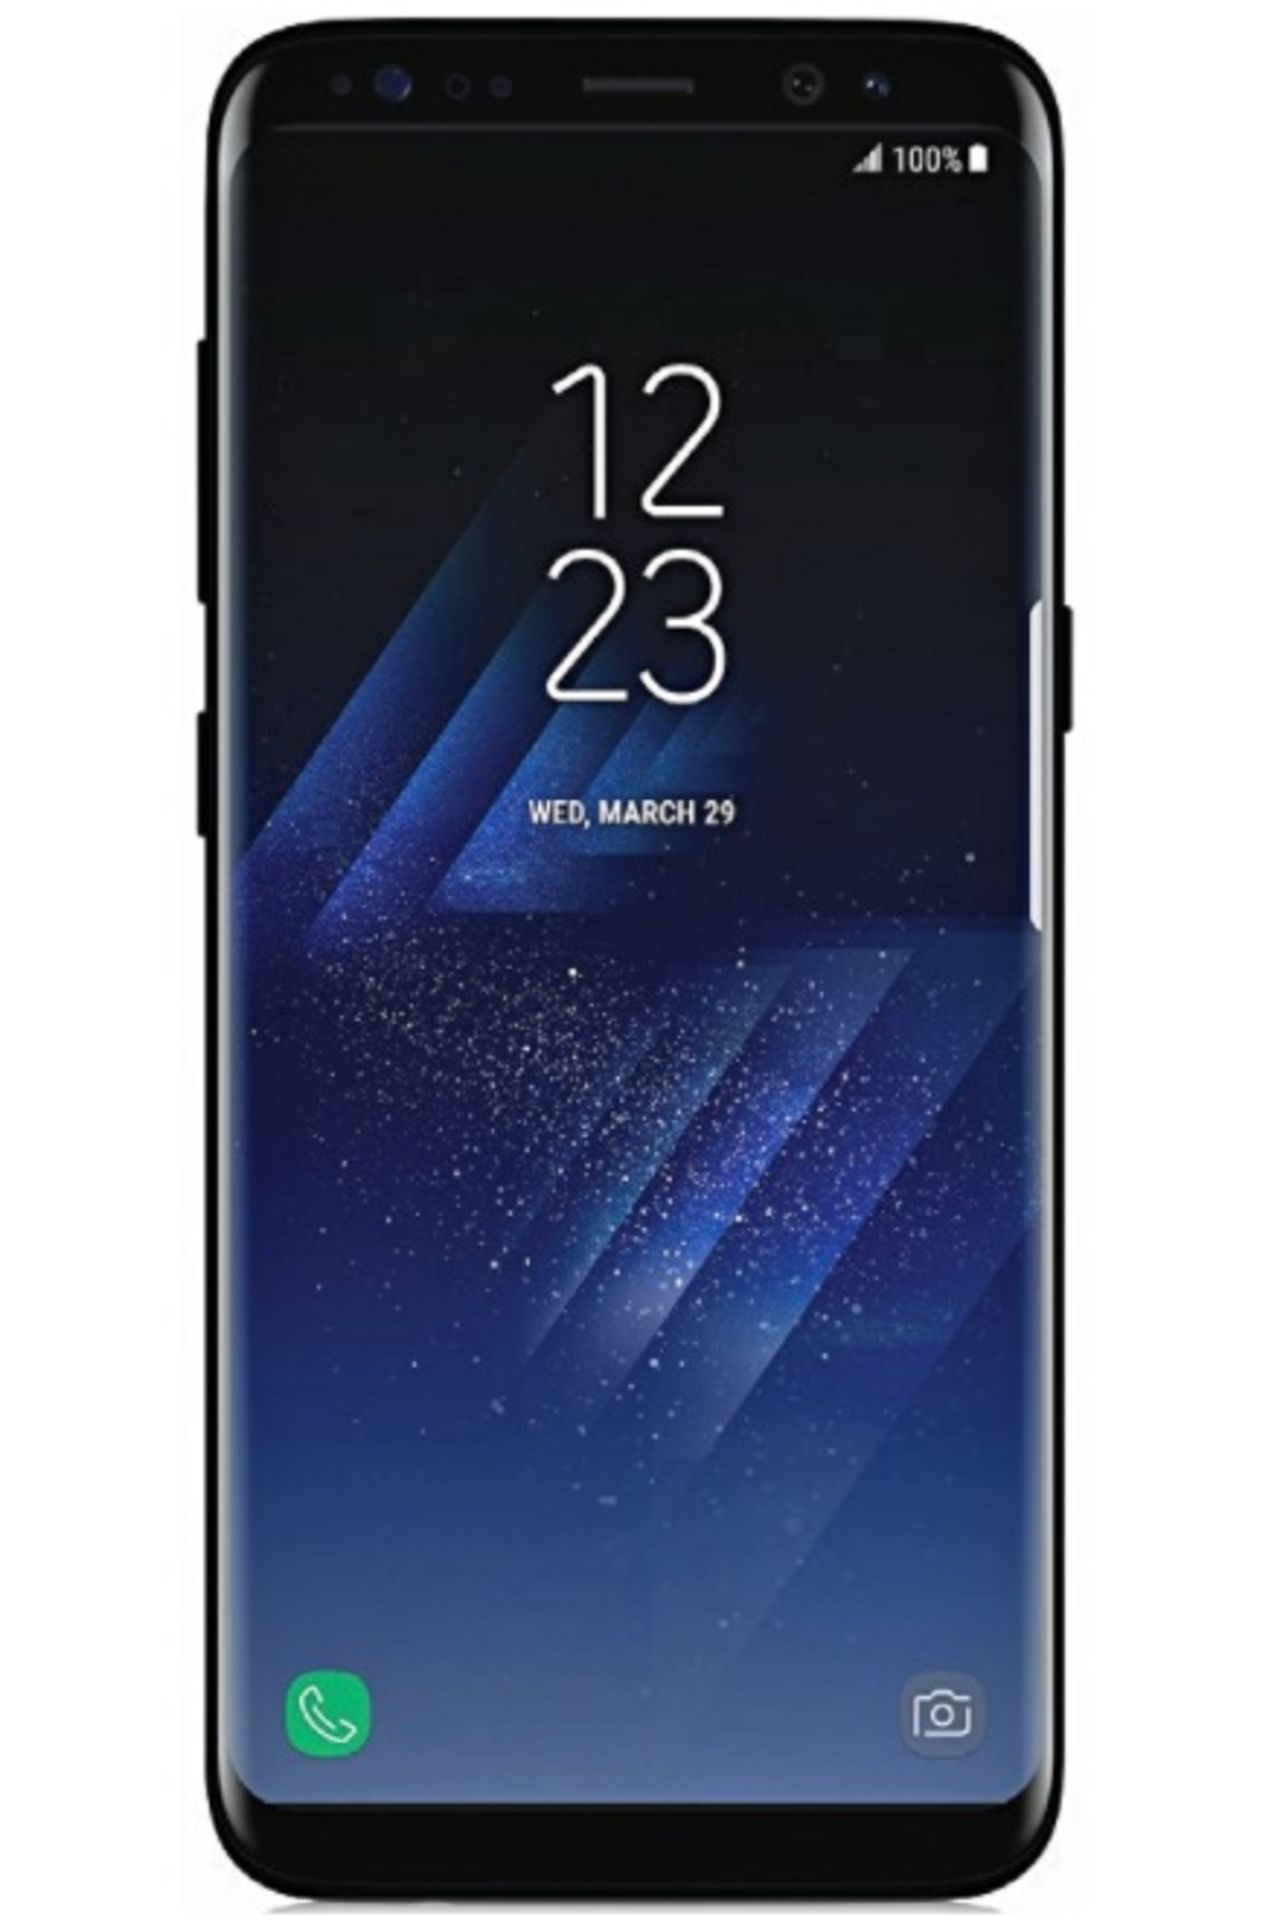 Grade A Samsung S8+ ( G9550F ) Colours May Vary Item available approx 10 working days after sale